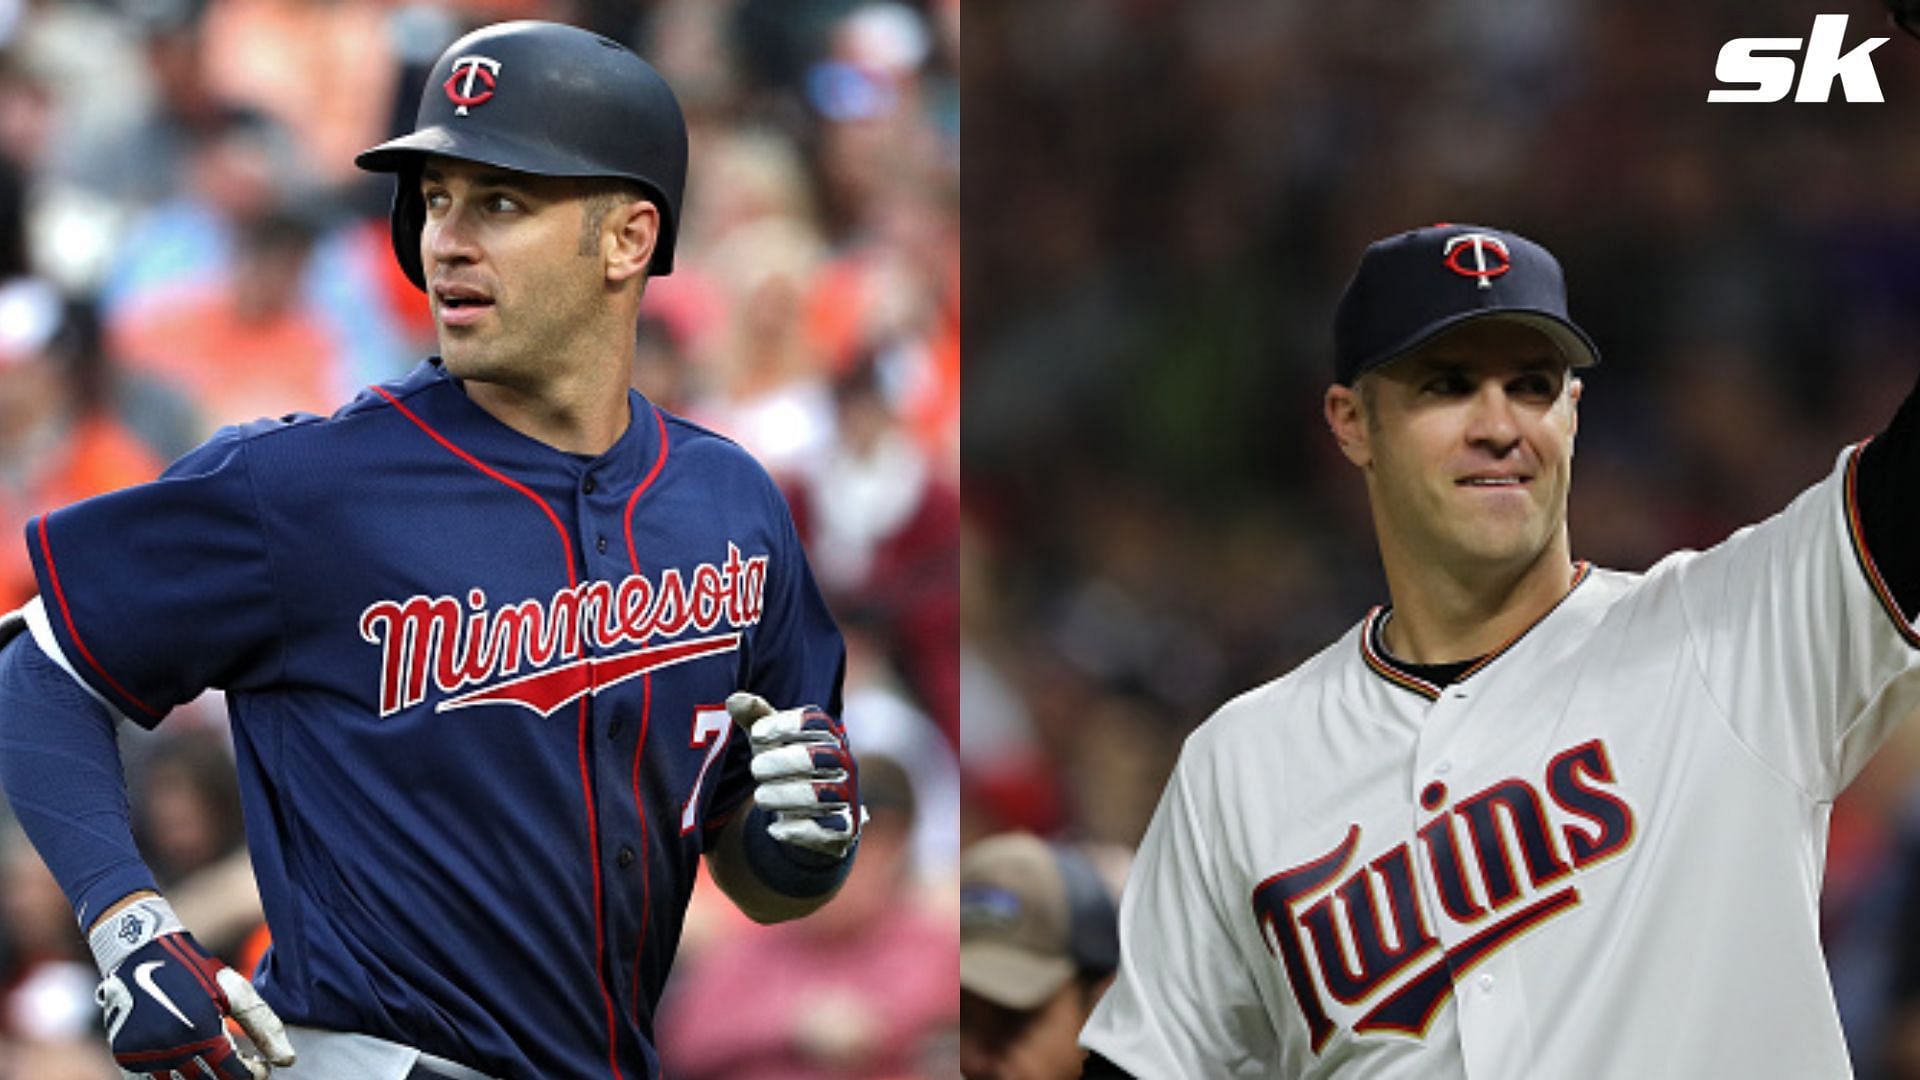 Joe Mauer circumspect of his chances after Hall of Fame nomination: 